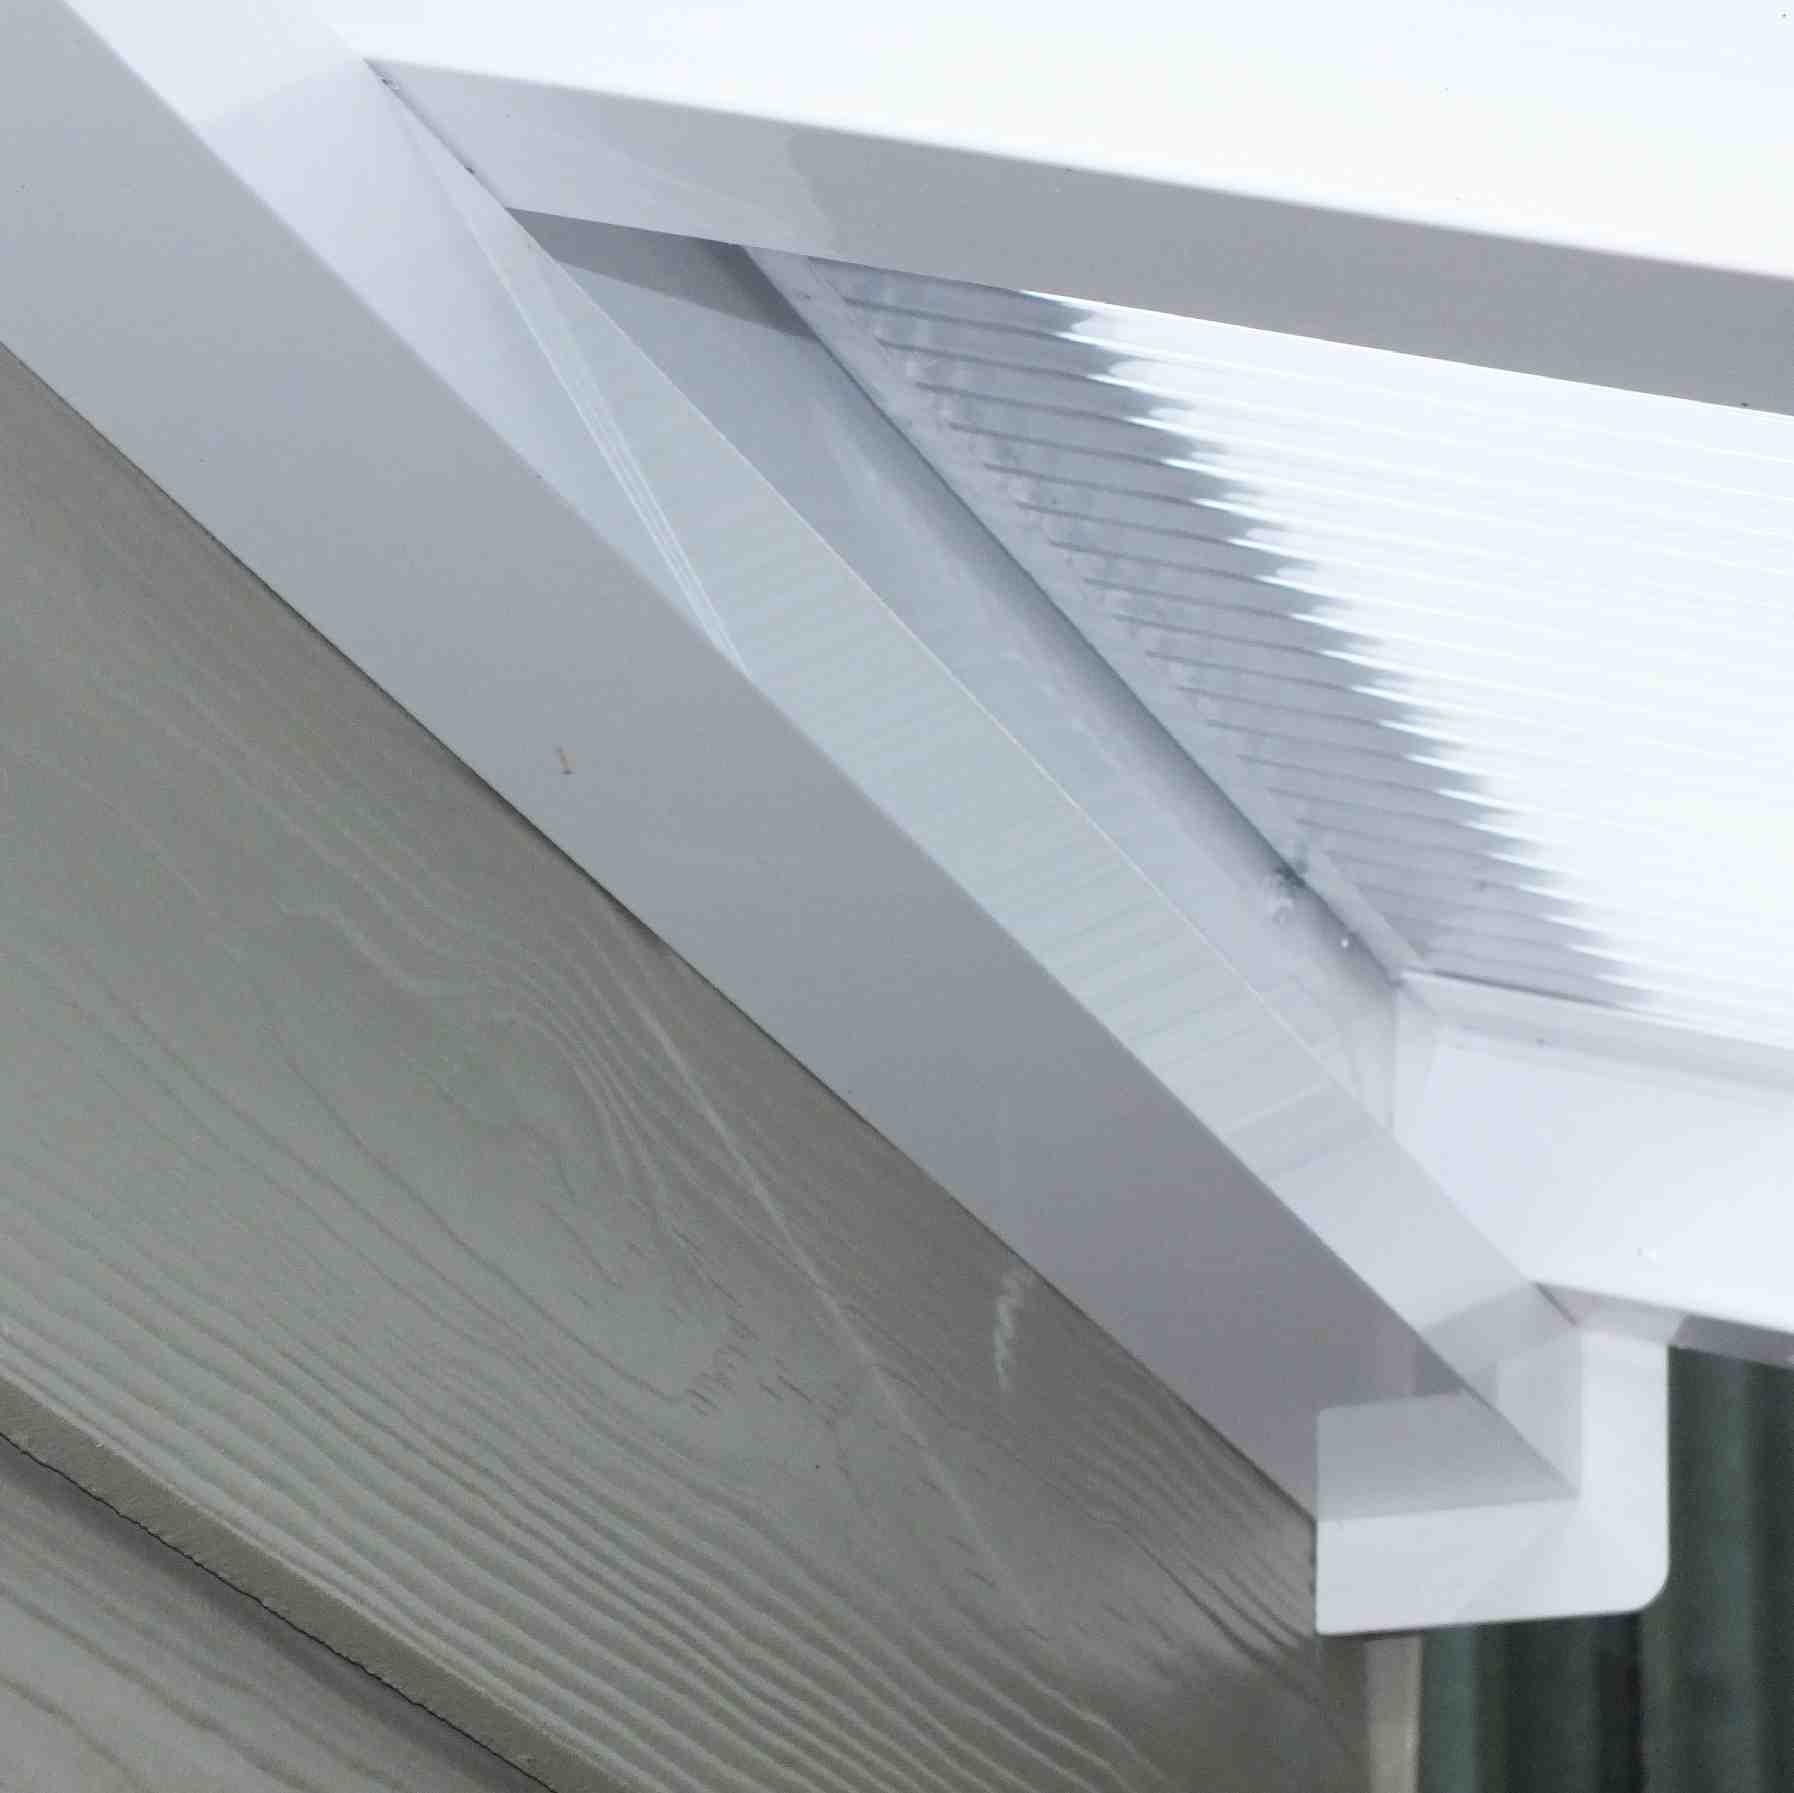 Great deals on Omega Verandah White with 16mm Polycarbonate Glazing - 7.8m (W) x 3.5m (P), (4) Supporting Posts